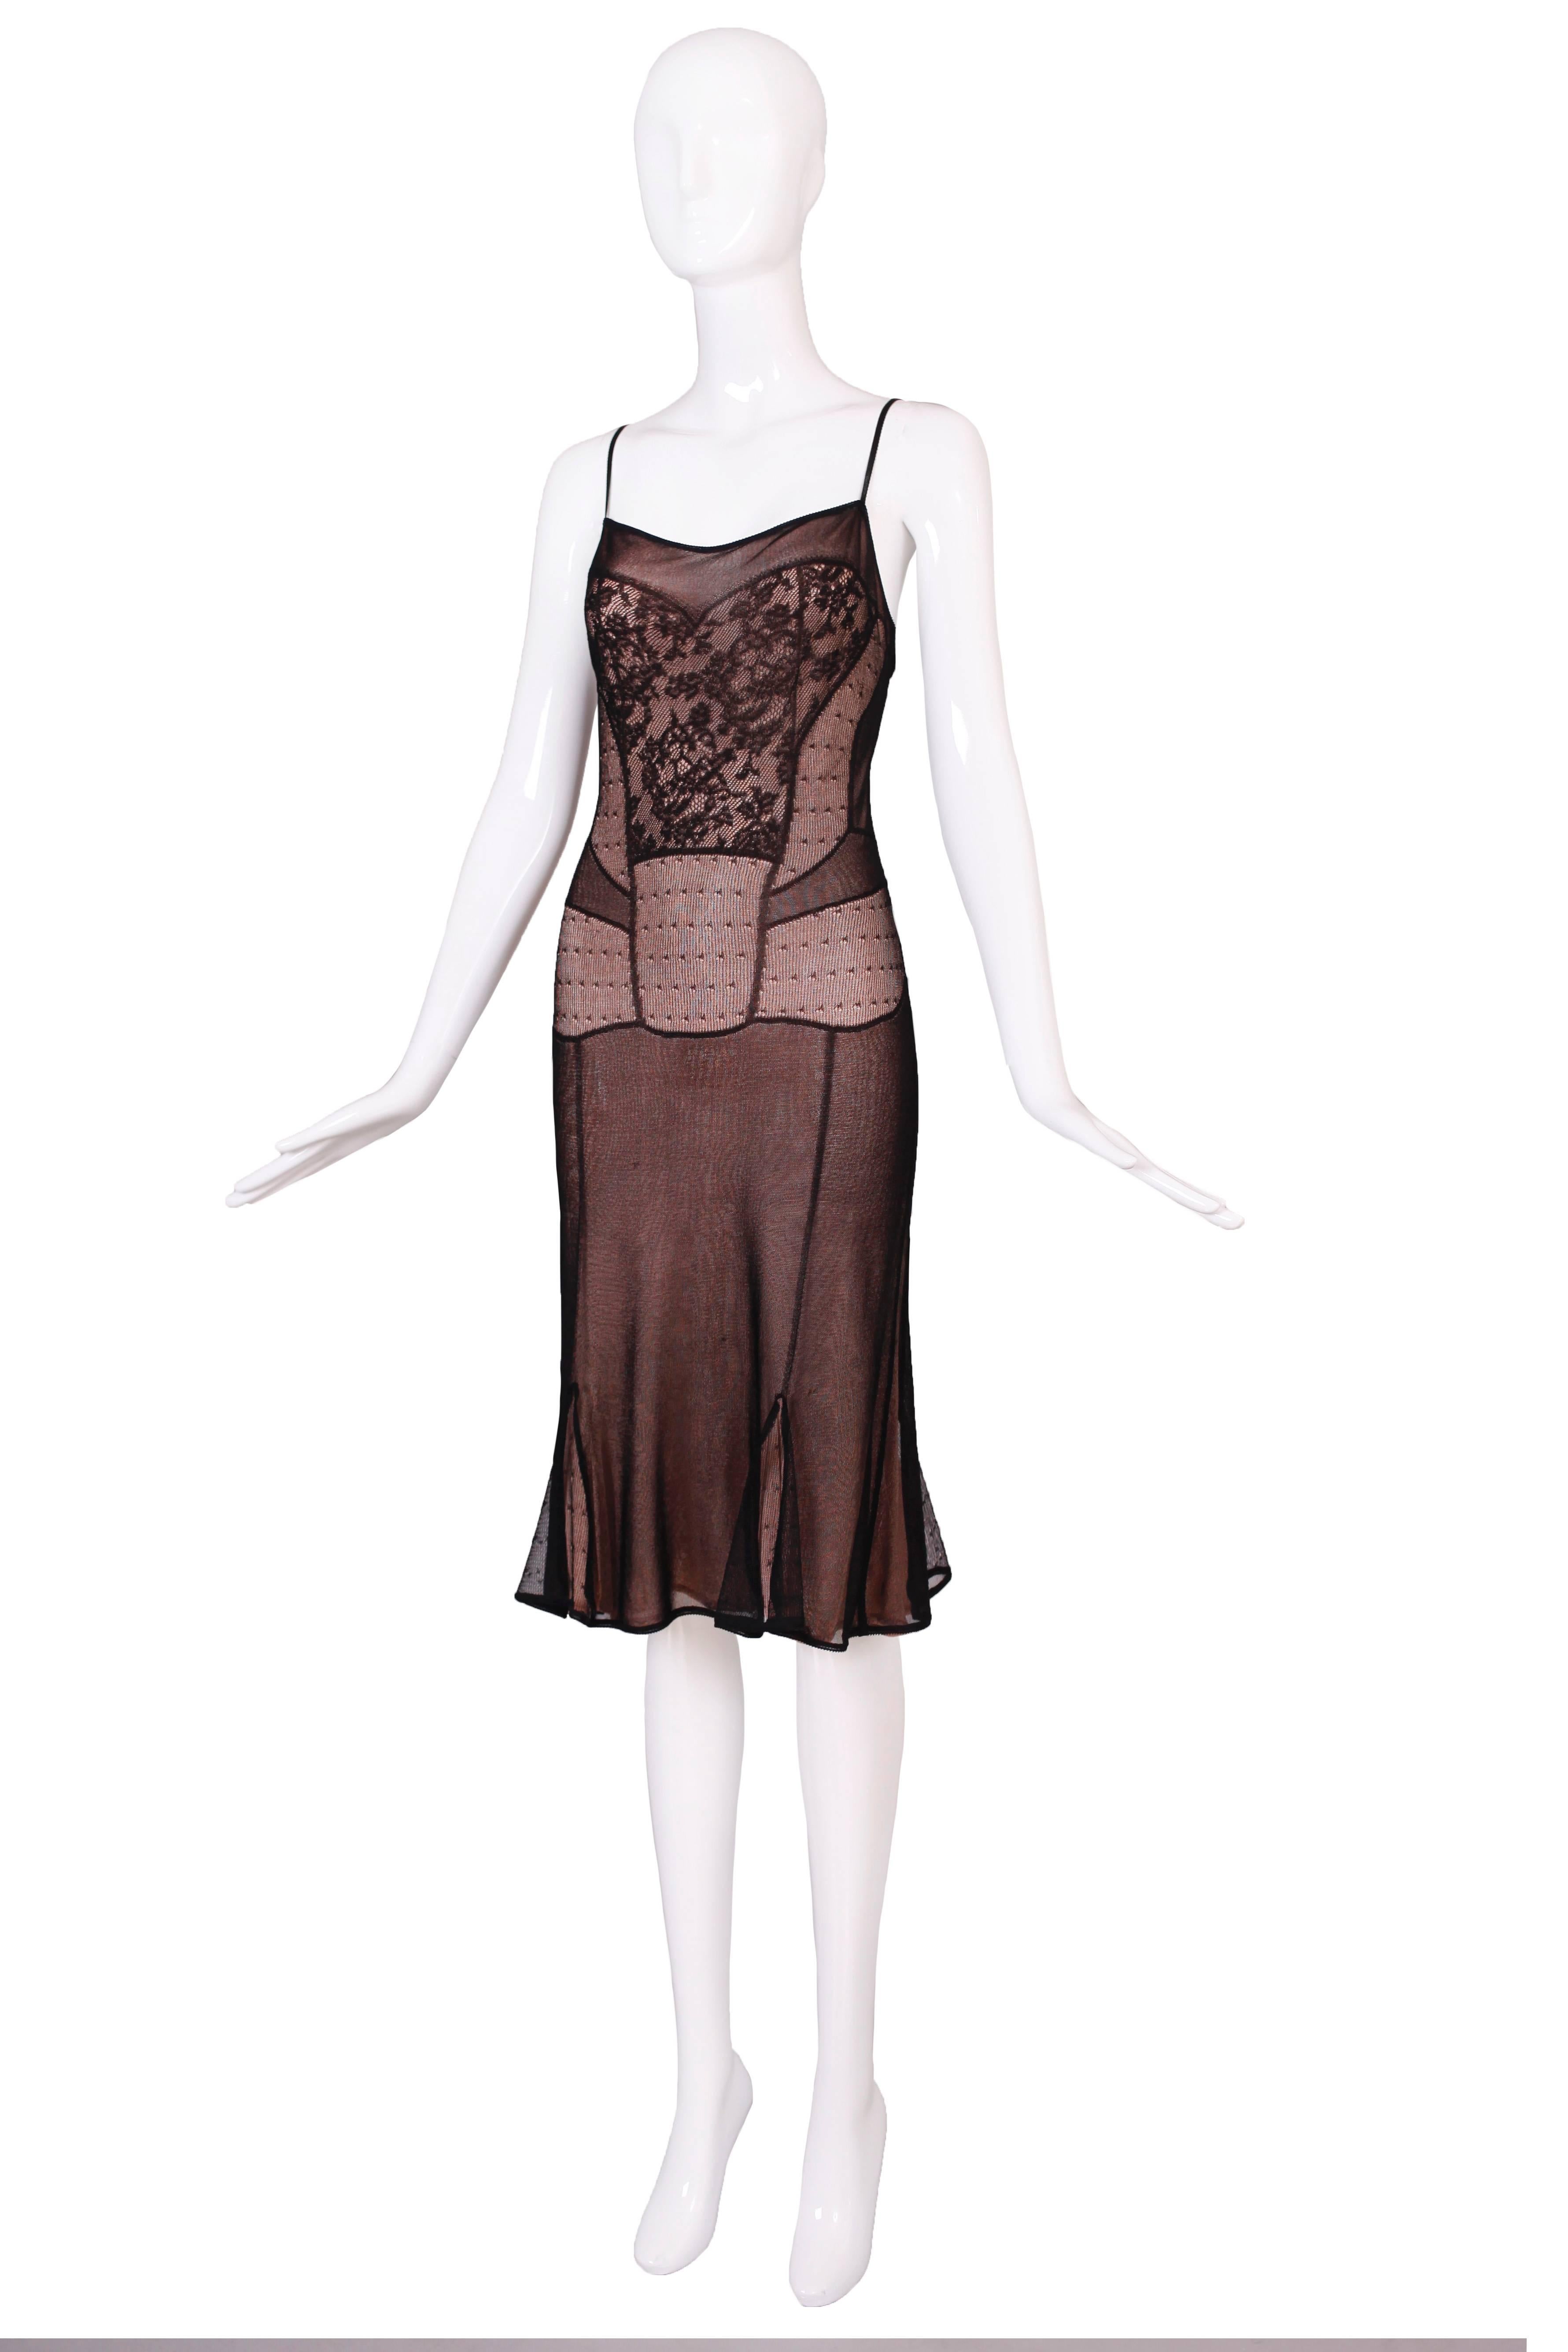 Christian Dior by John Galliano black and nude mesh bias cut cocktail dress. In excellent condition. Size tag 8.